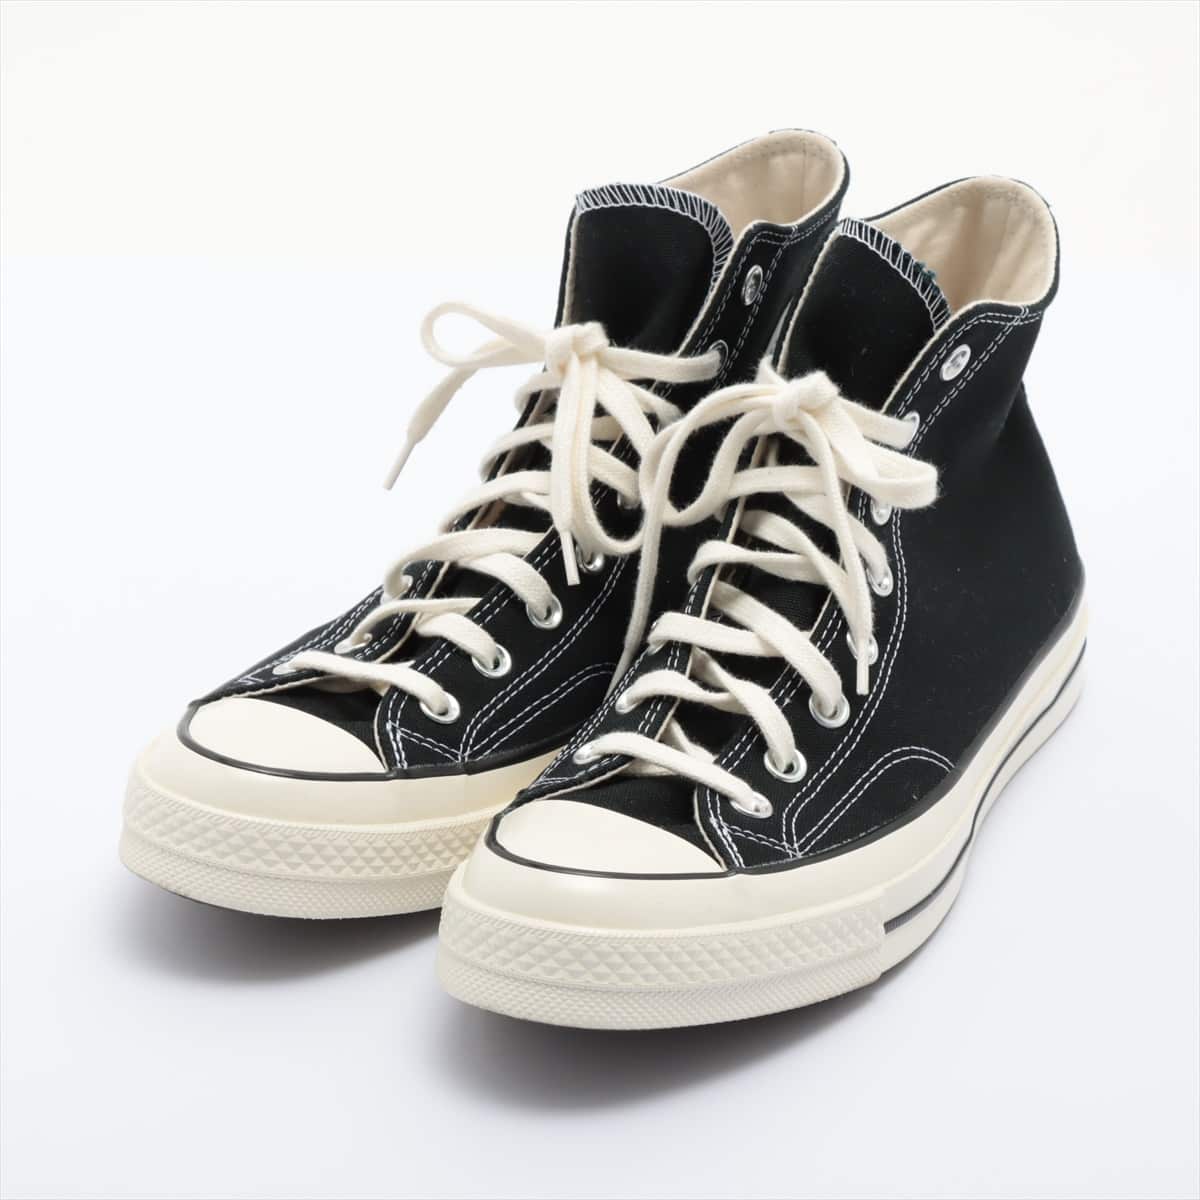 Converse All Stars Canvas & leather High-top Sneakers 27.0cm Men's Black Chuck Taylor